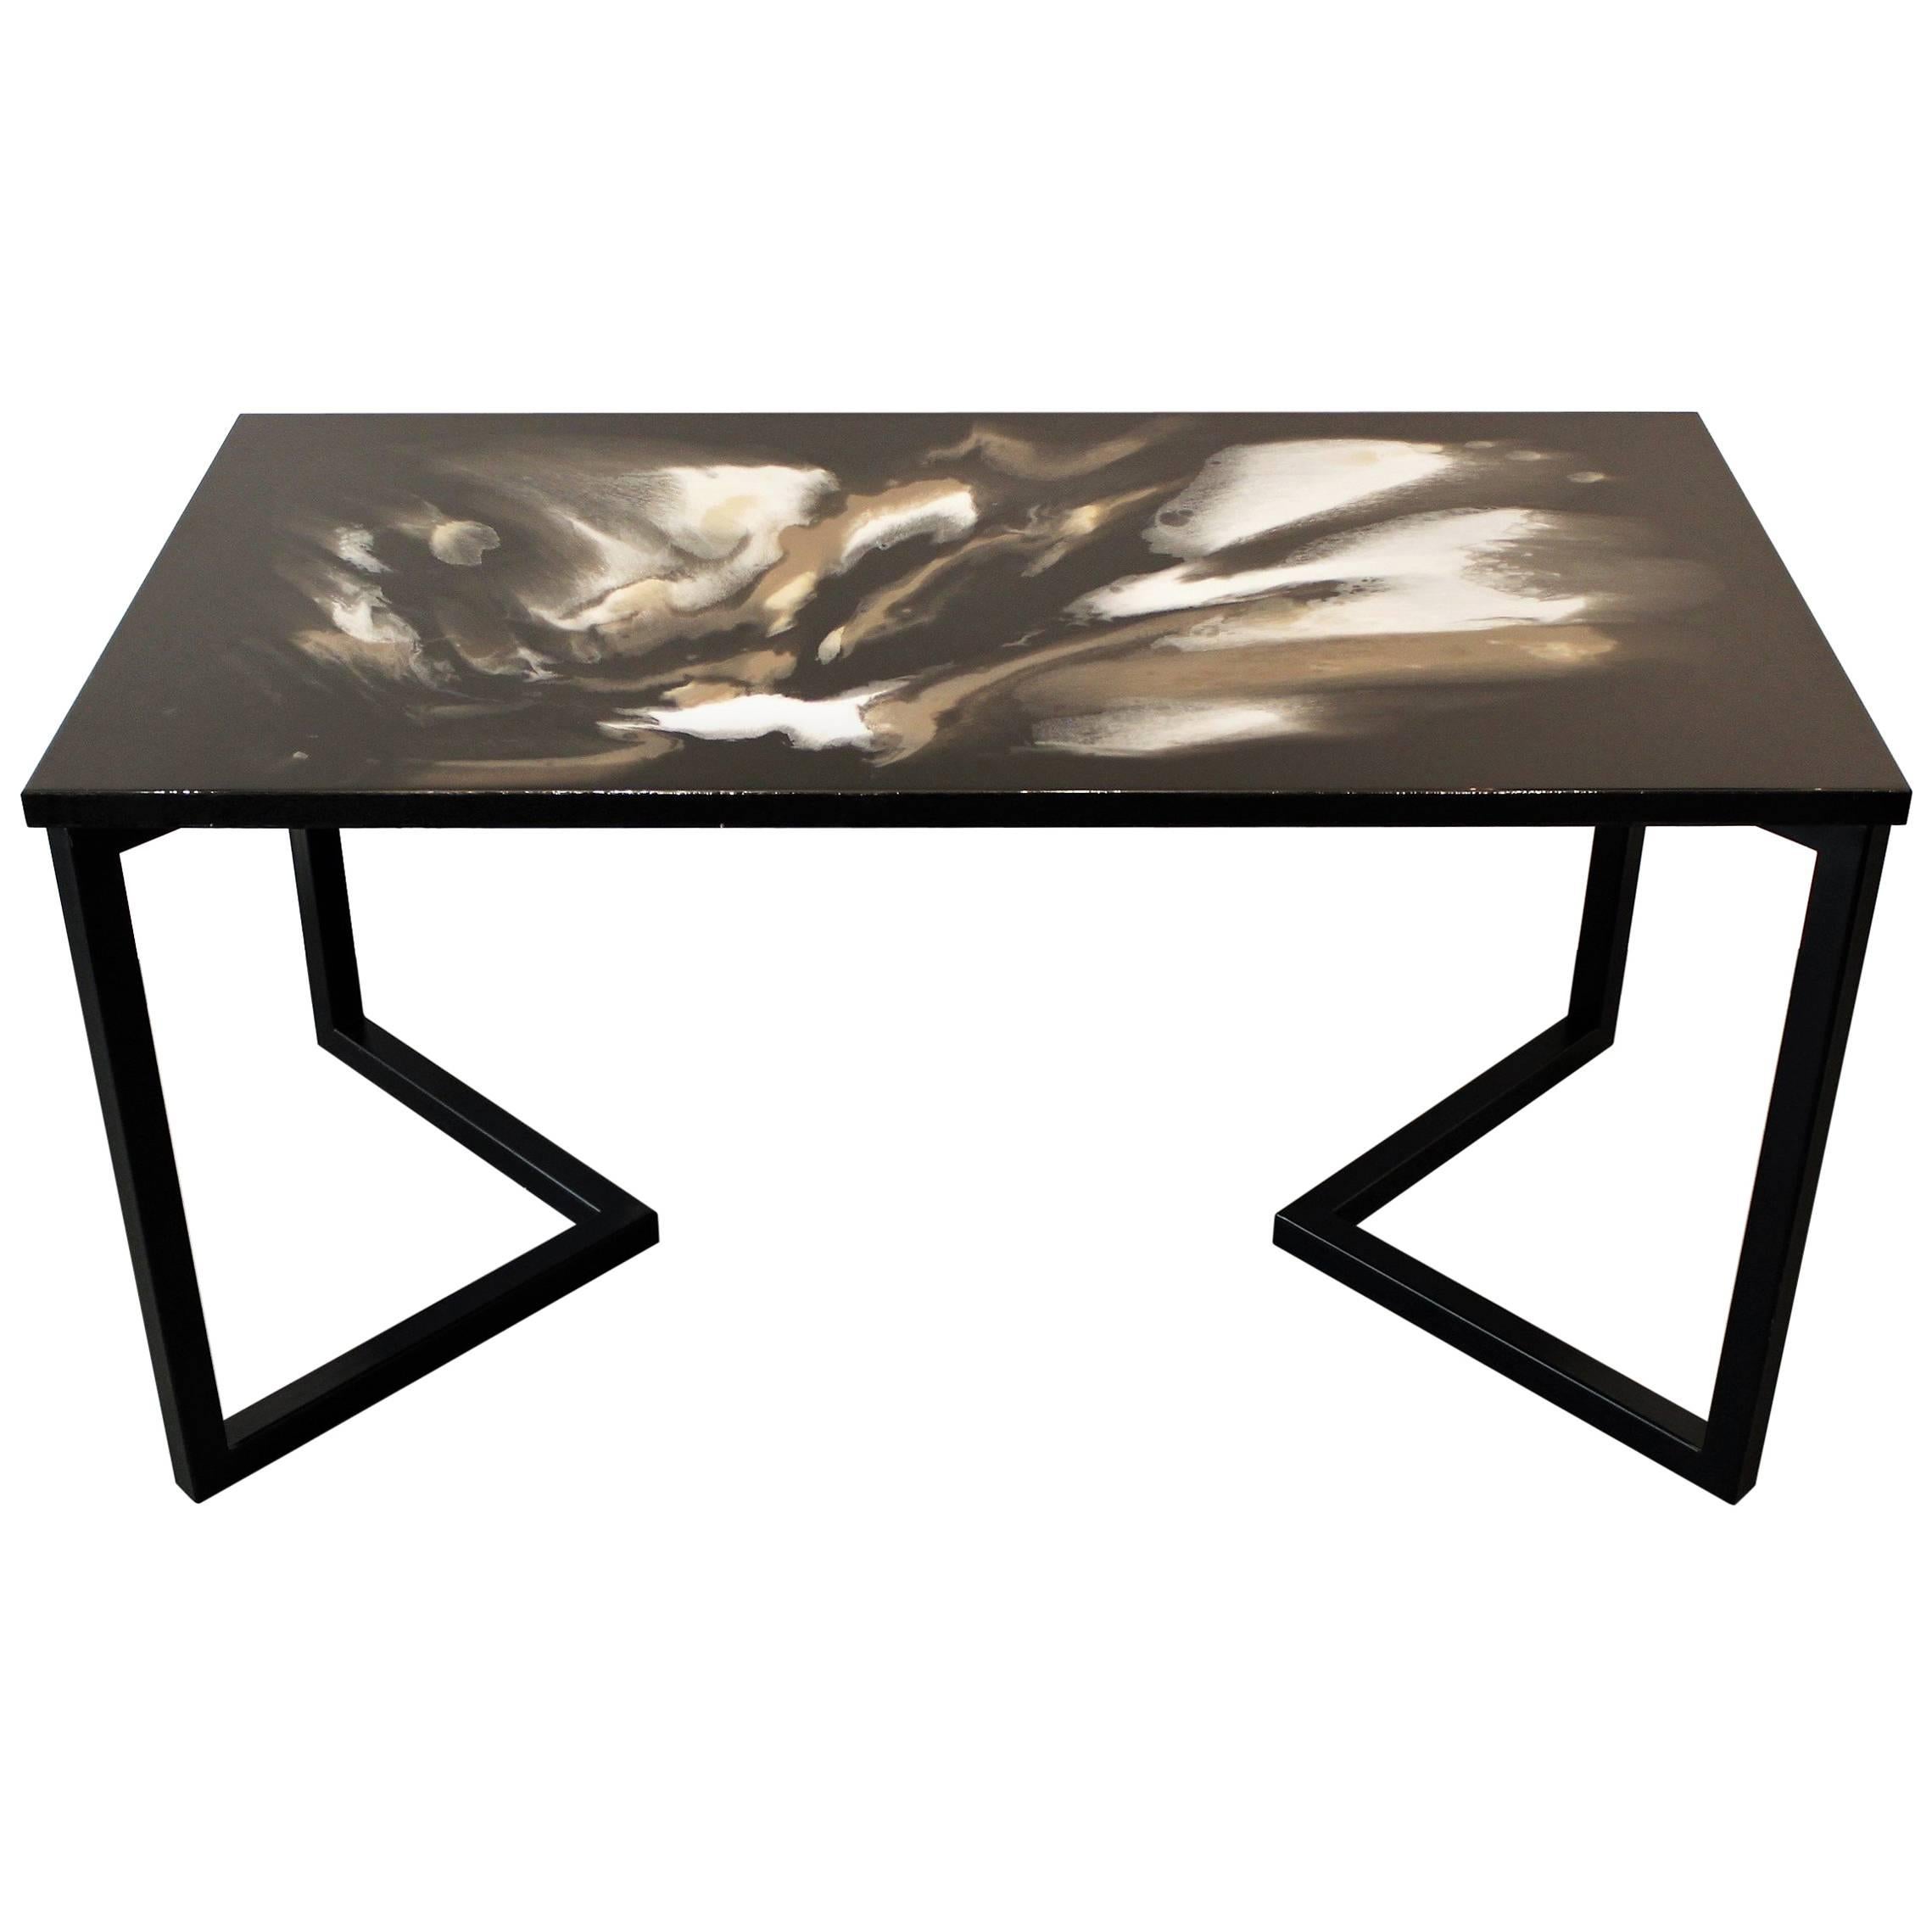 Contemporary Resin Dining Table "Swans' Promenade" on Black Satin Steel Base For Sale